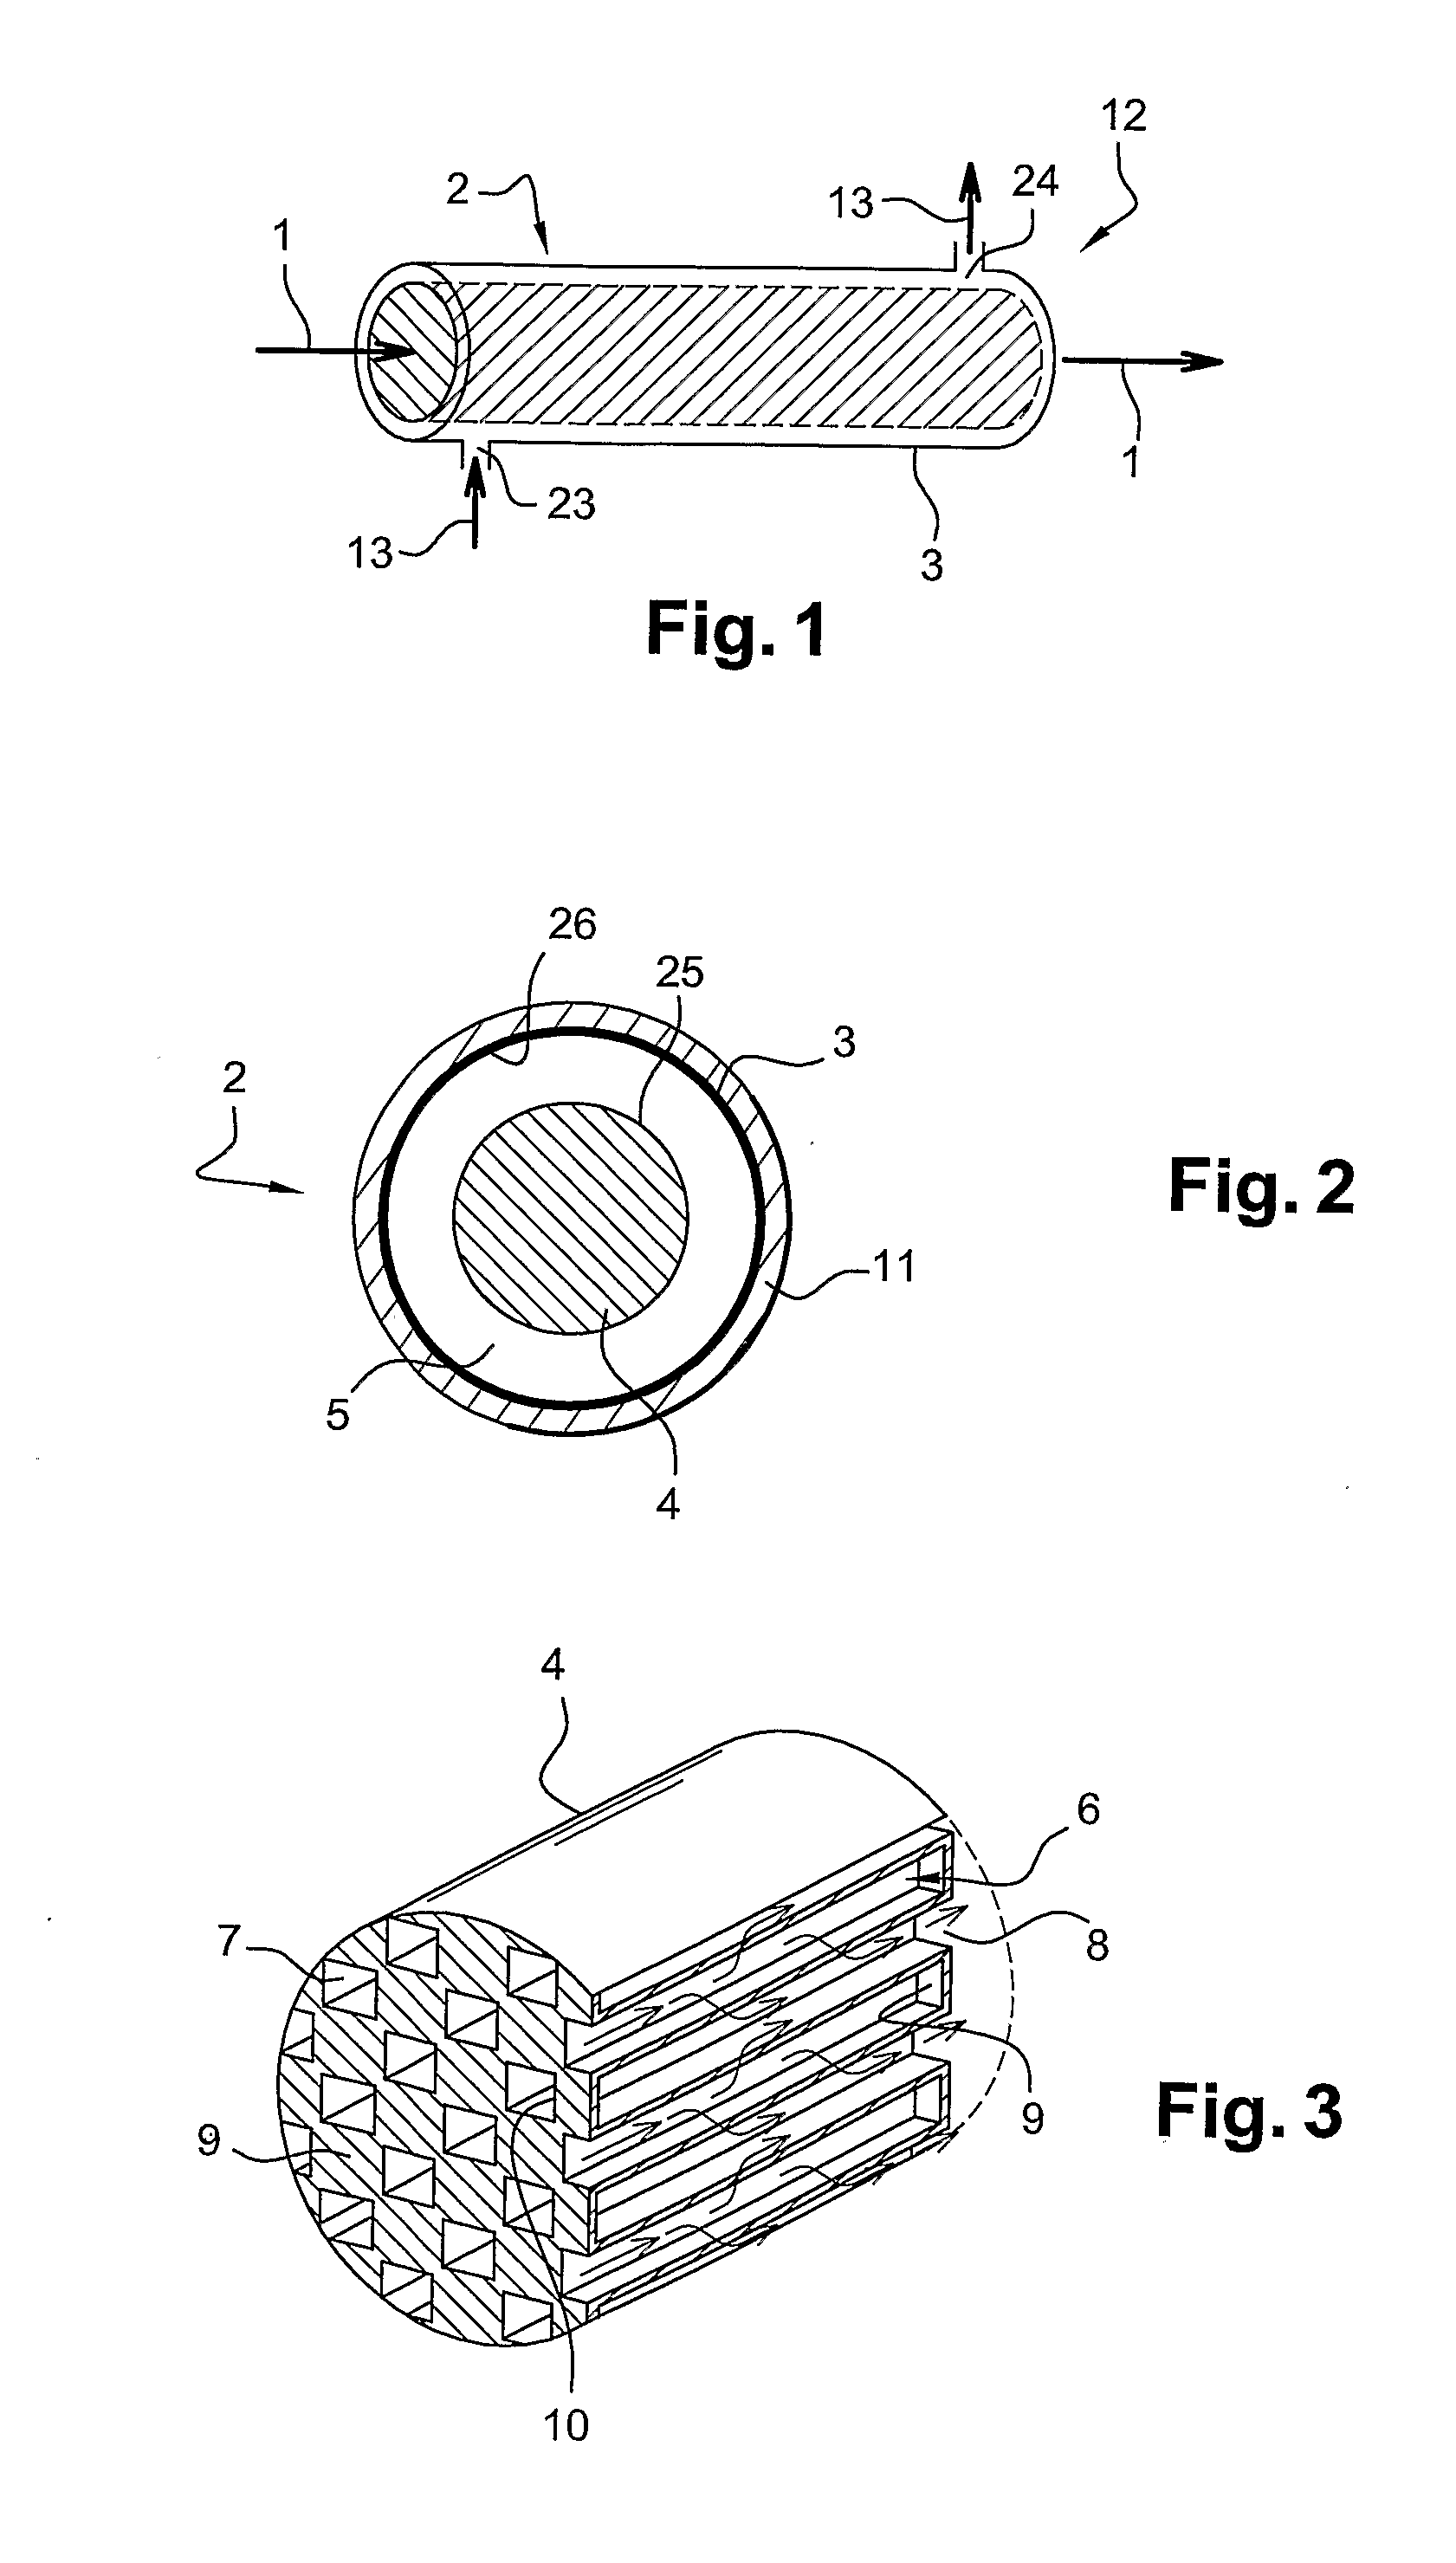 Energy recovery system for an internal combustion engine